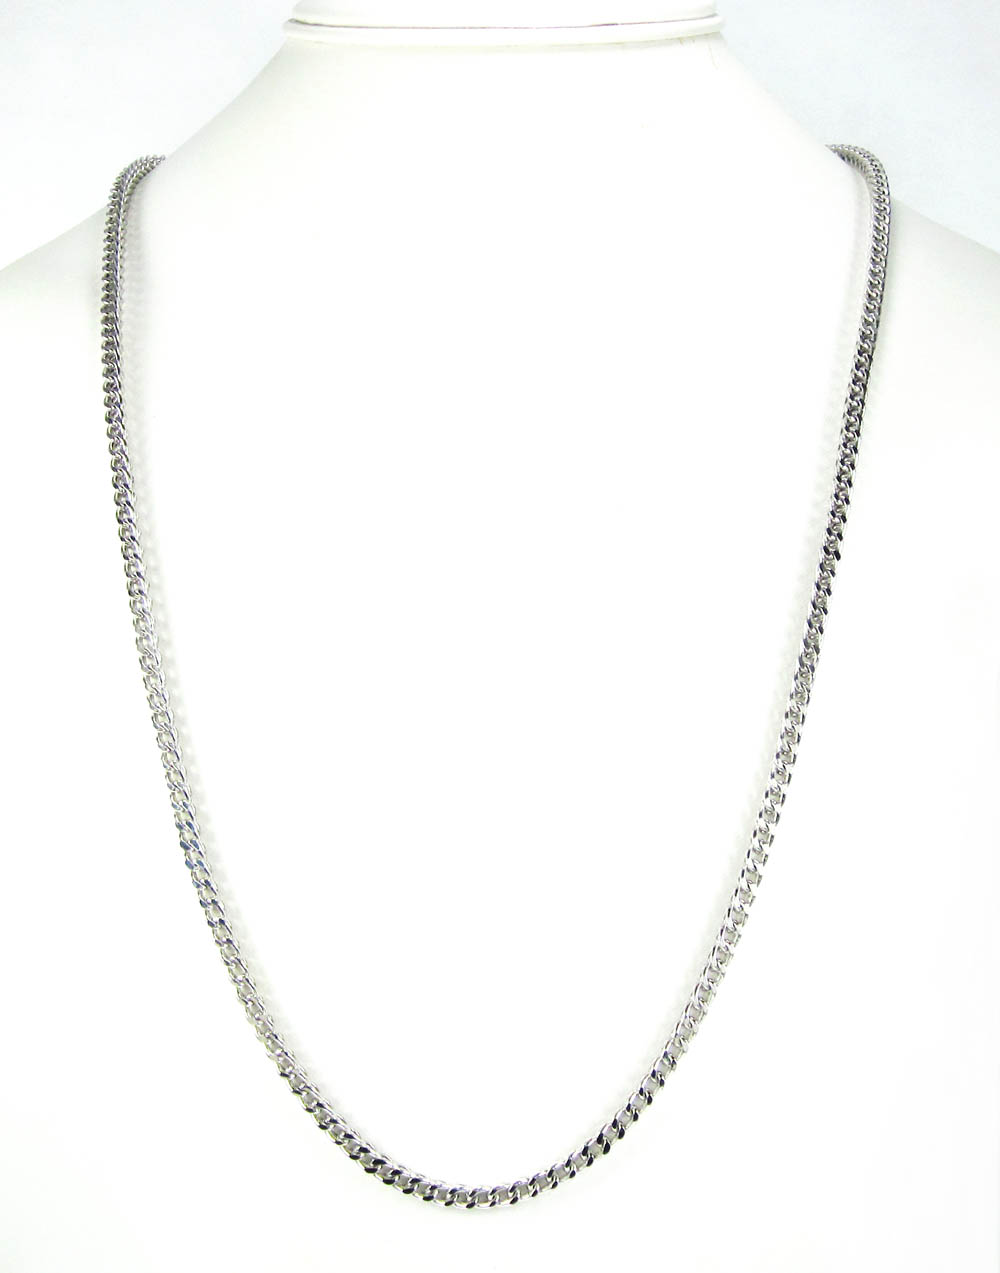 14k white gold smooth cut franco link chain 22-36 inch 3.75mm